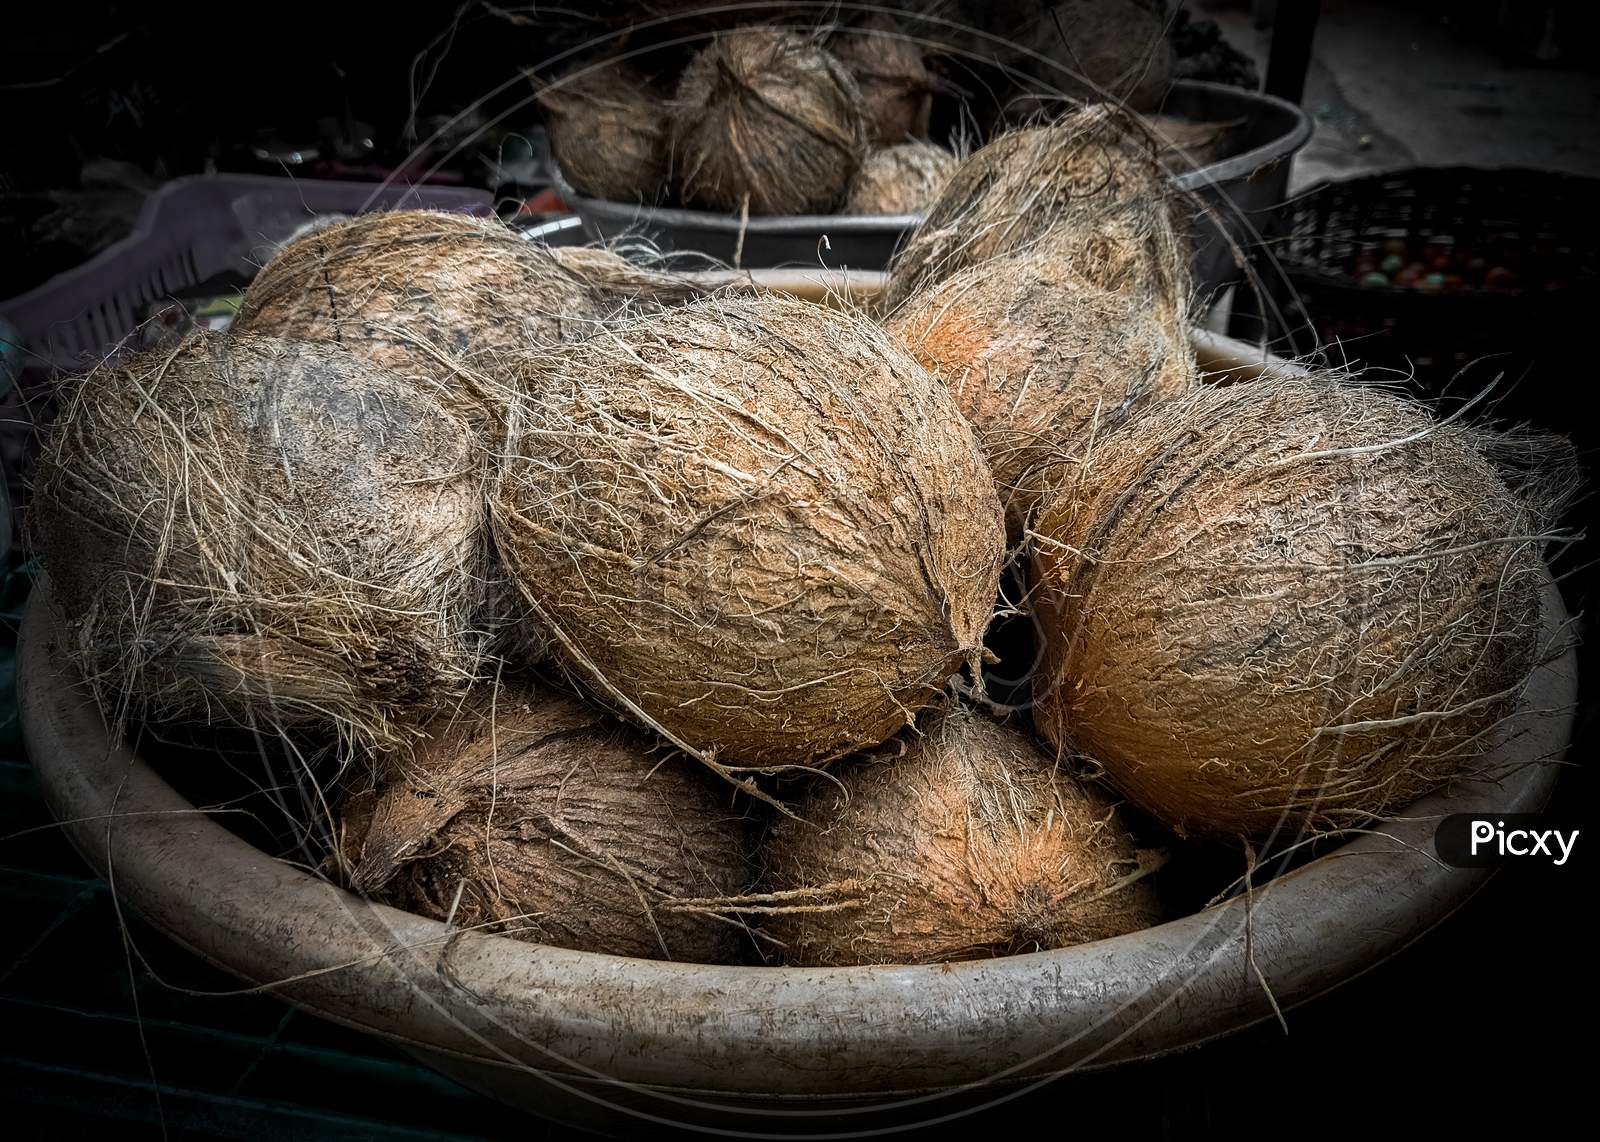 Collection of peeled coconuts for sale in the market.